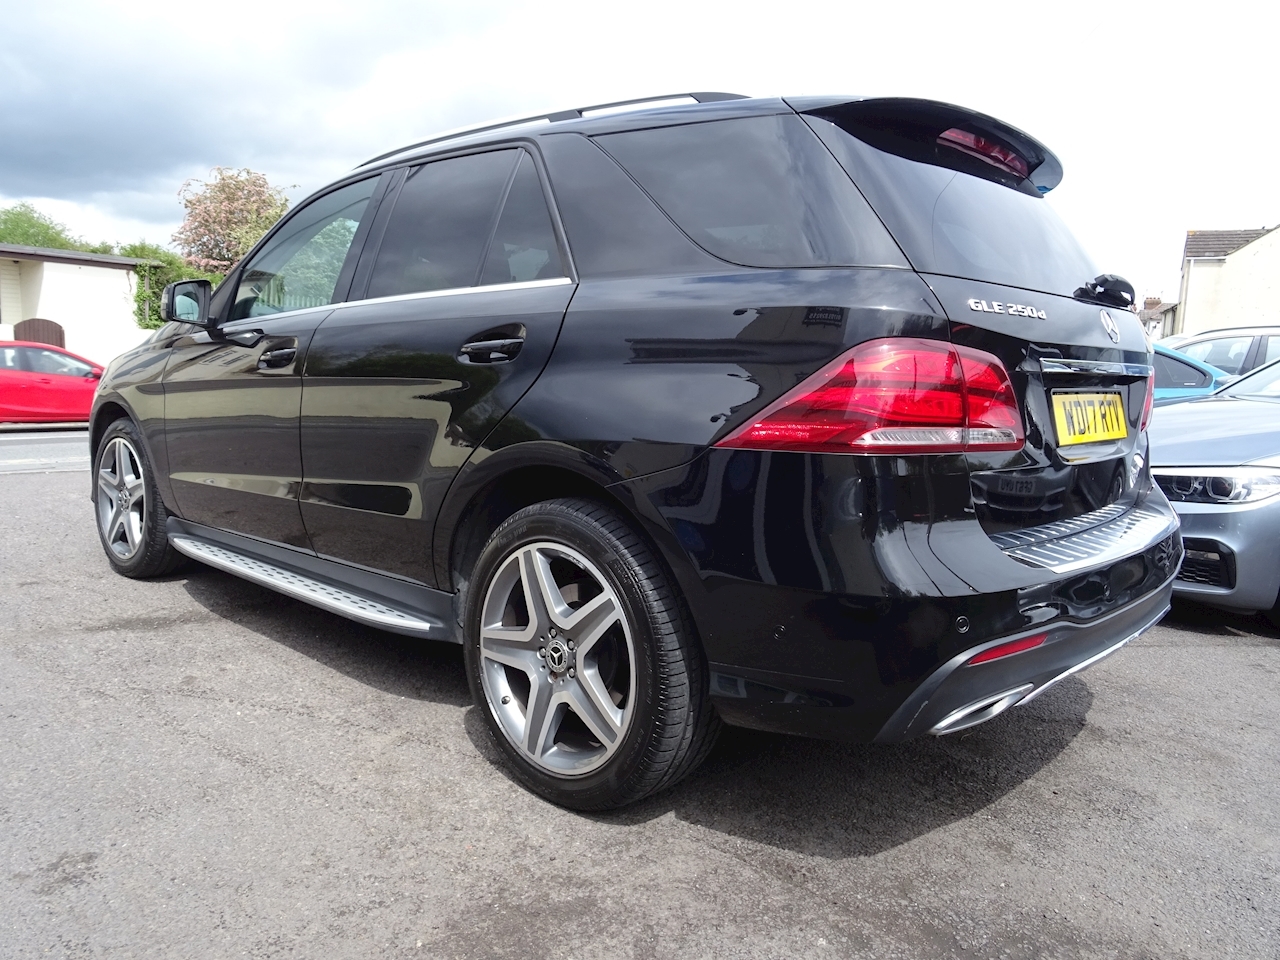 2.1 GLE250d AMG Line SUV 5dr Diesel G-Tronic 4MATIC (s/s) (204 ps)